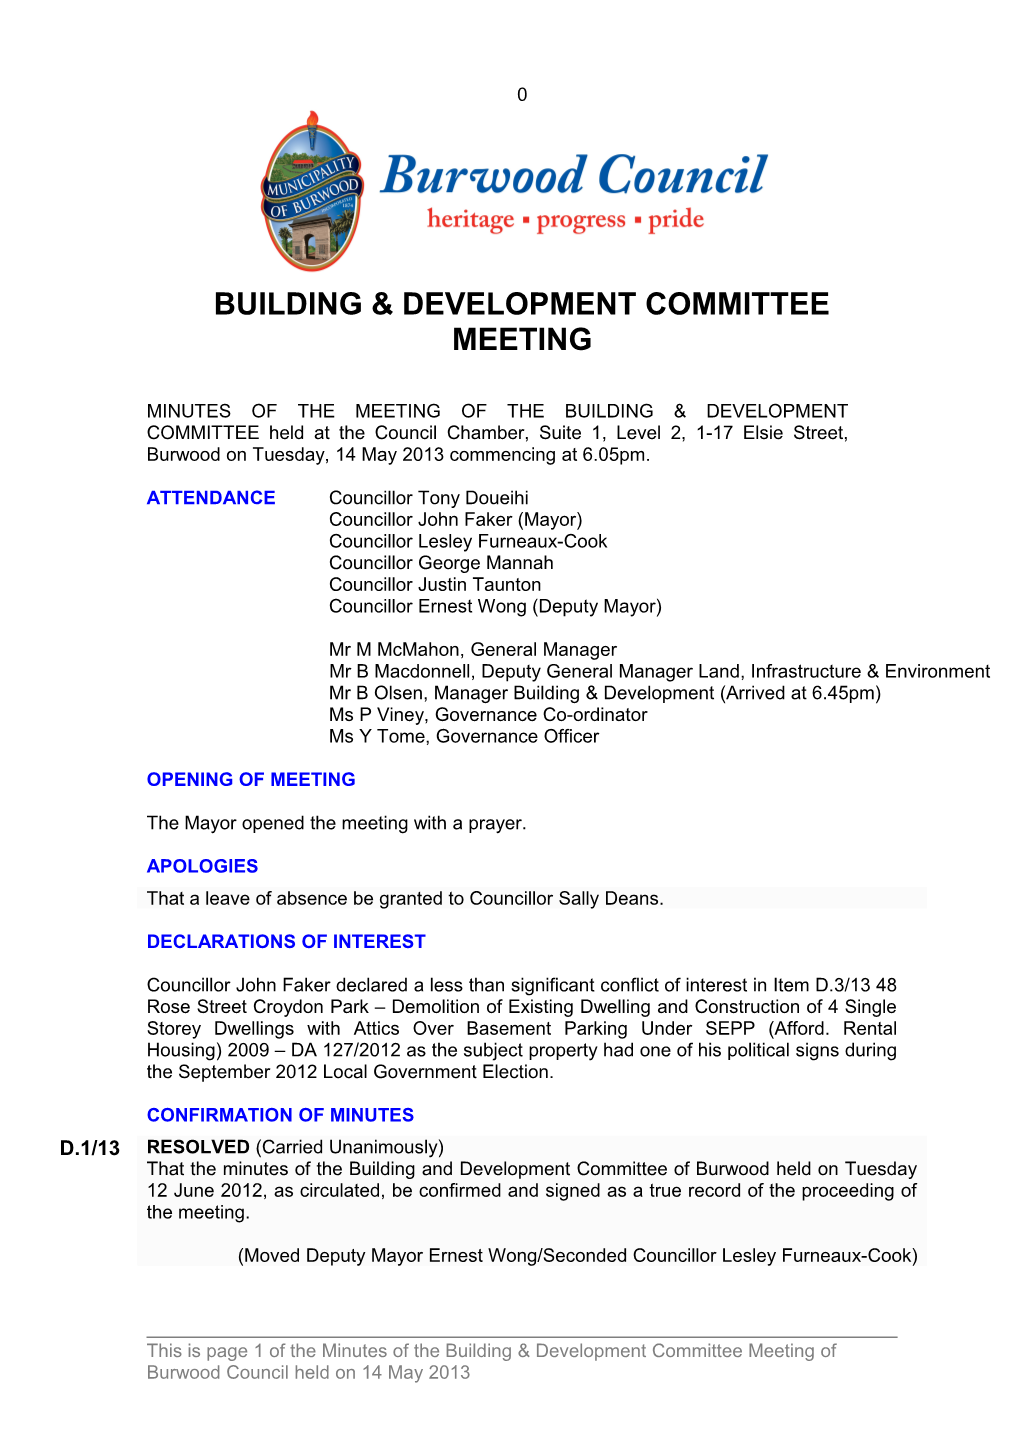 Pro-Forma Minutes of Building & Development Committee Meeting - 14 May 2013